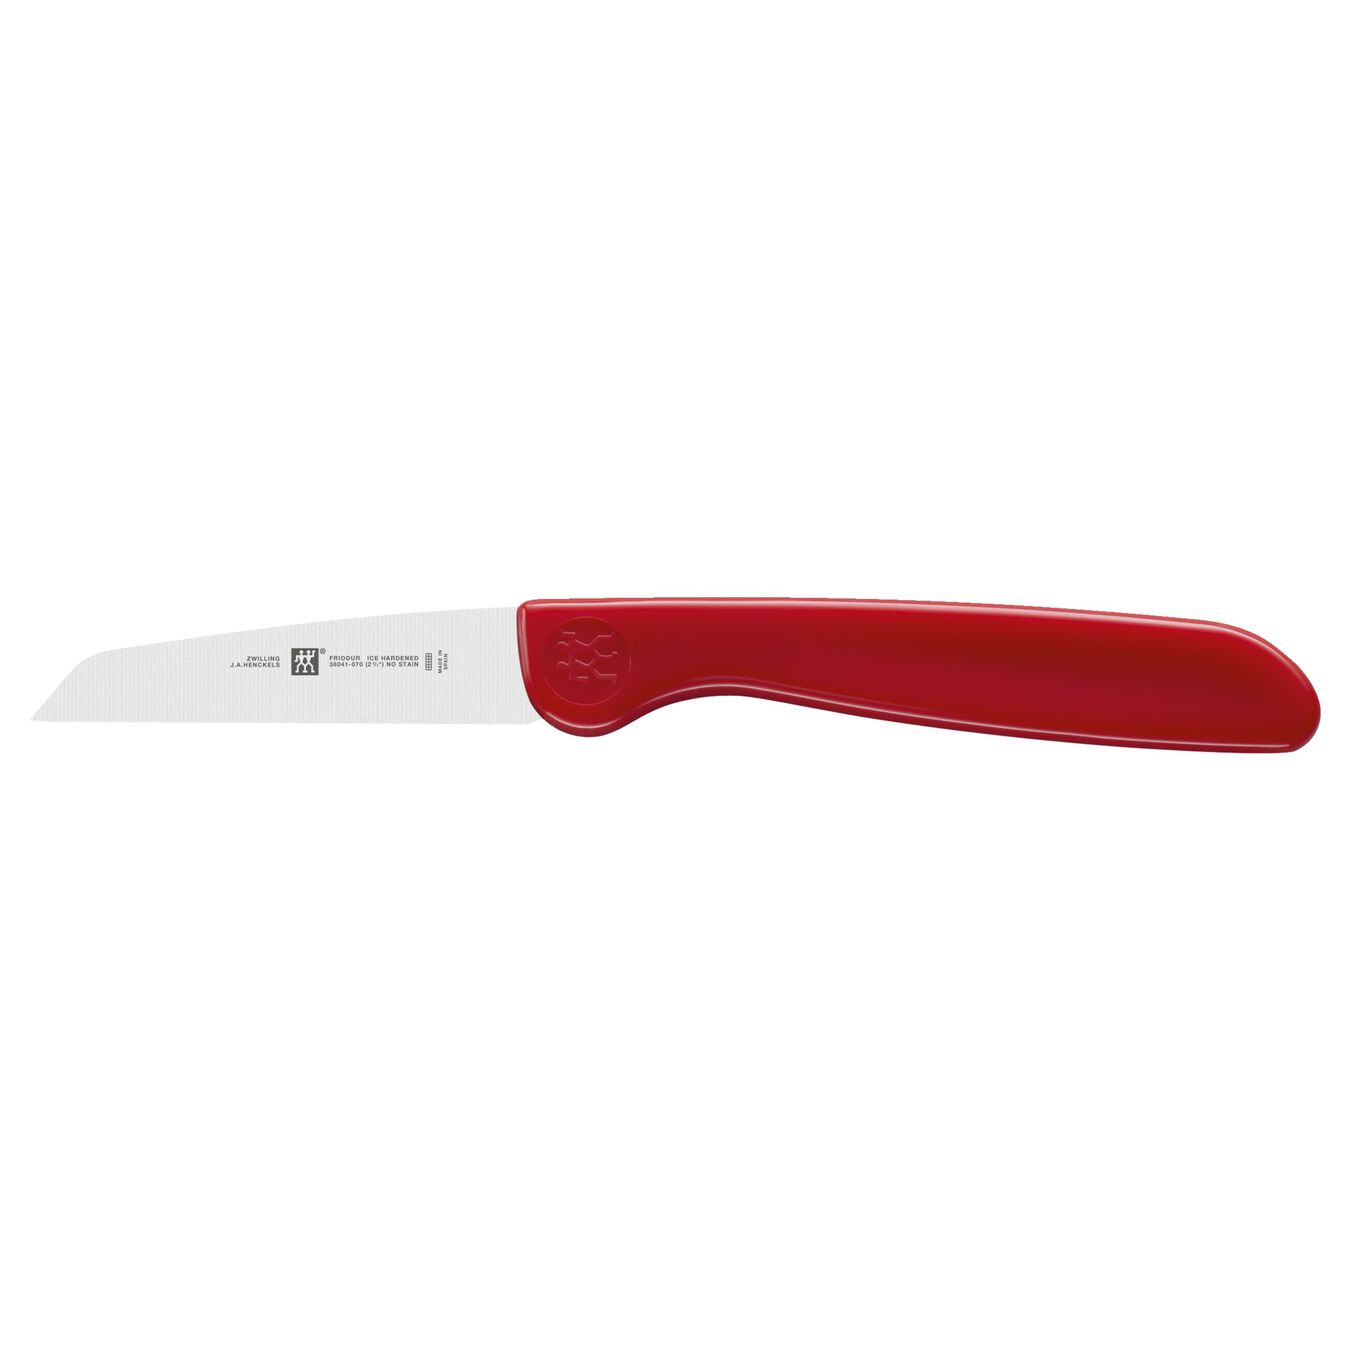 2.75 inch Vegetable knife - Visual Imperfections,,large 1